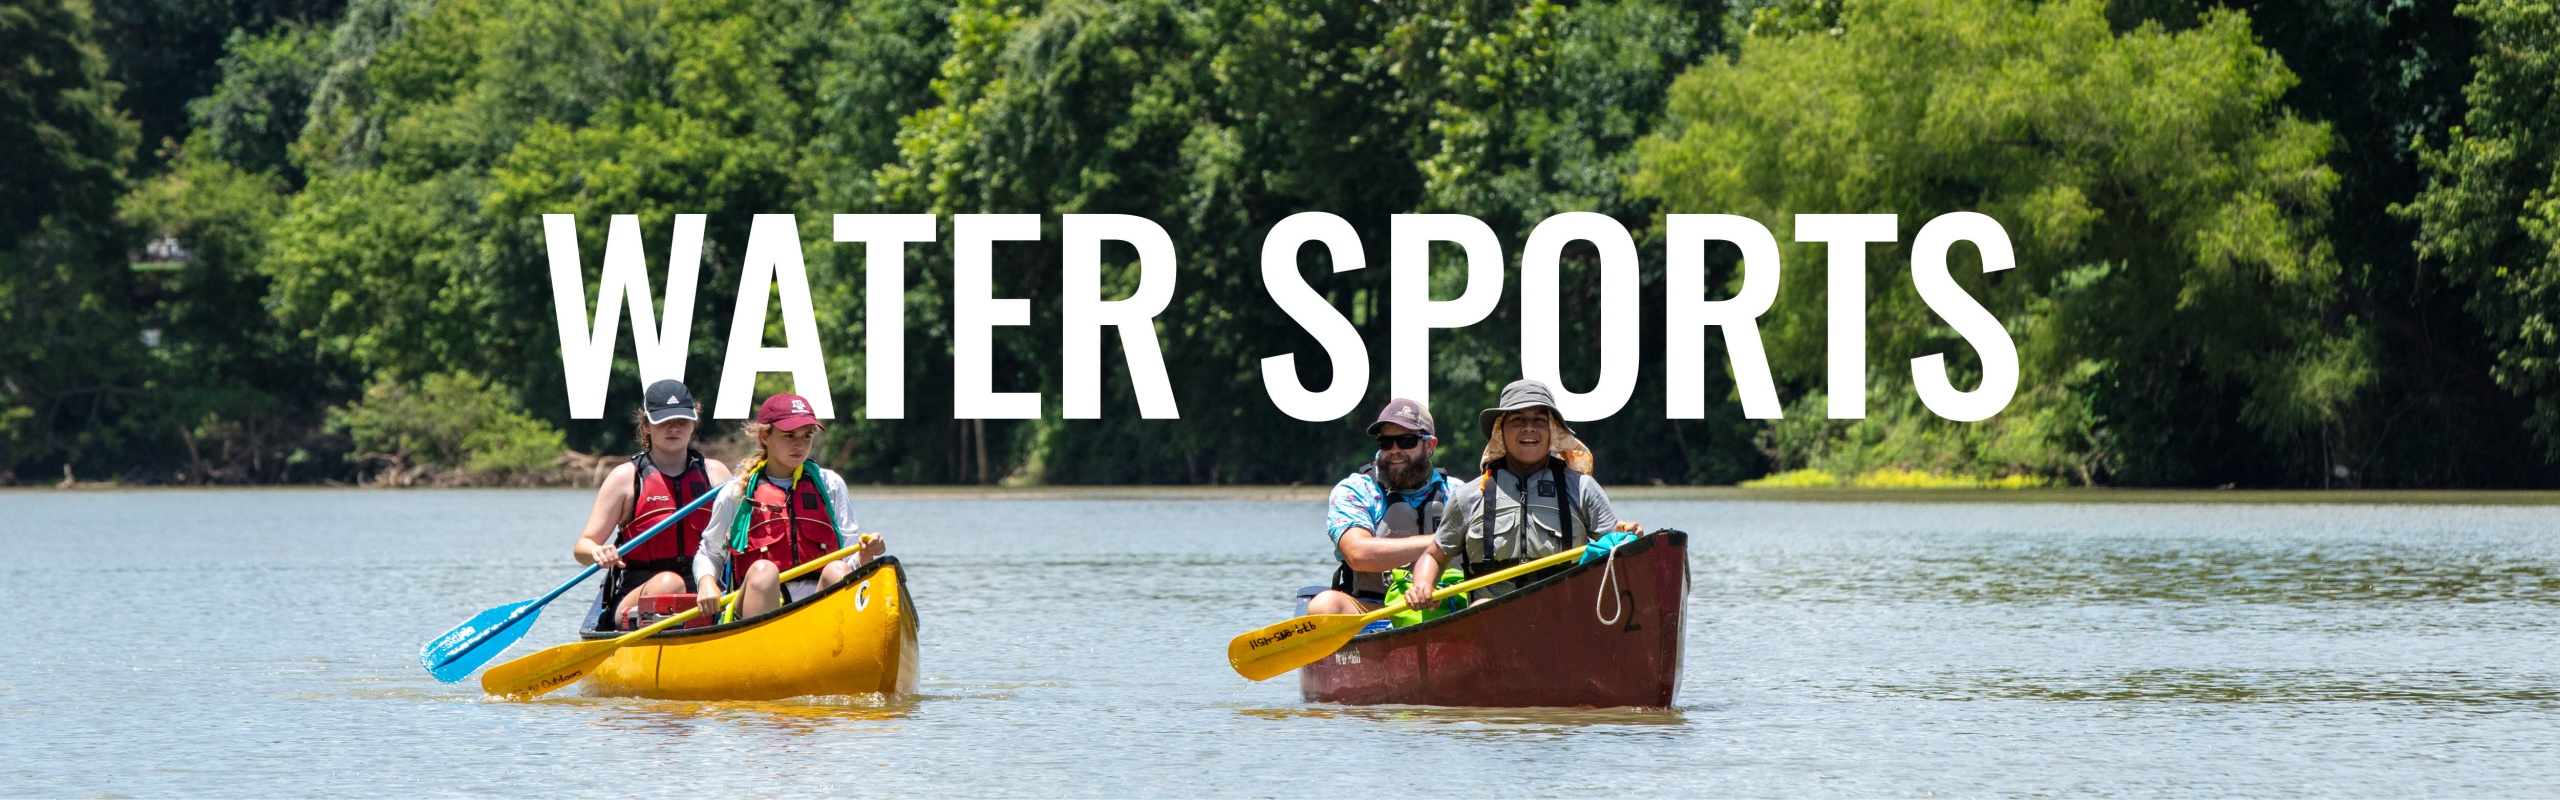 two kayaks are on a river with two people in each kayak with "Water Sports" written across the image